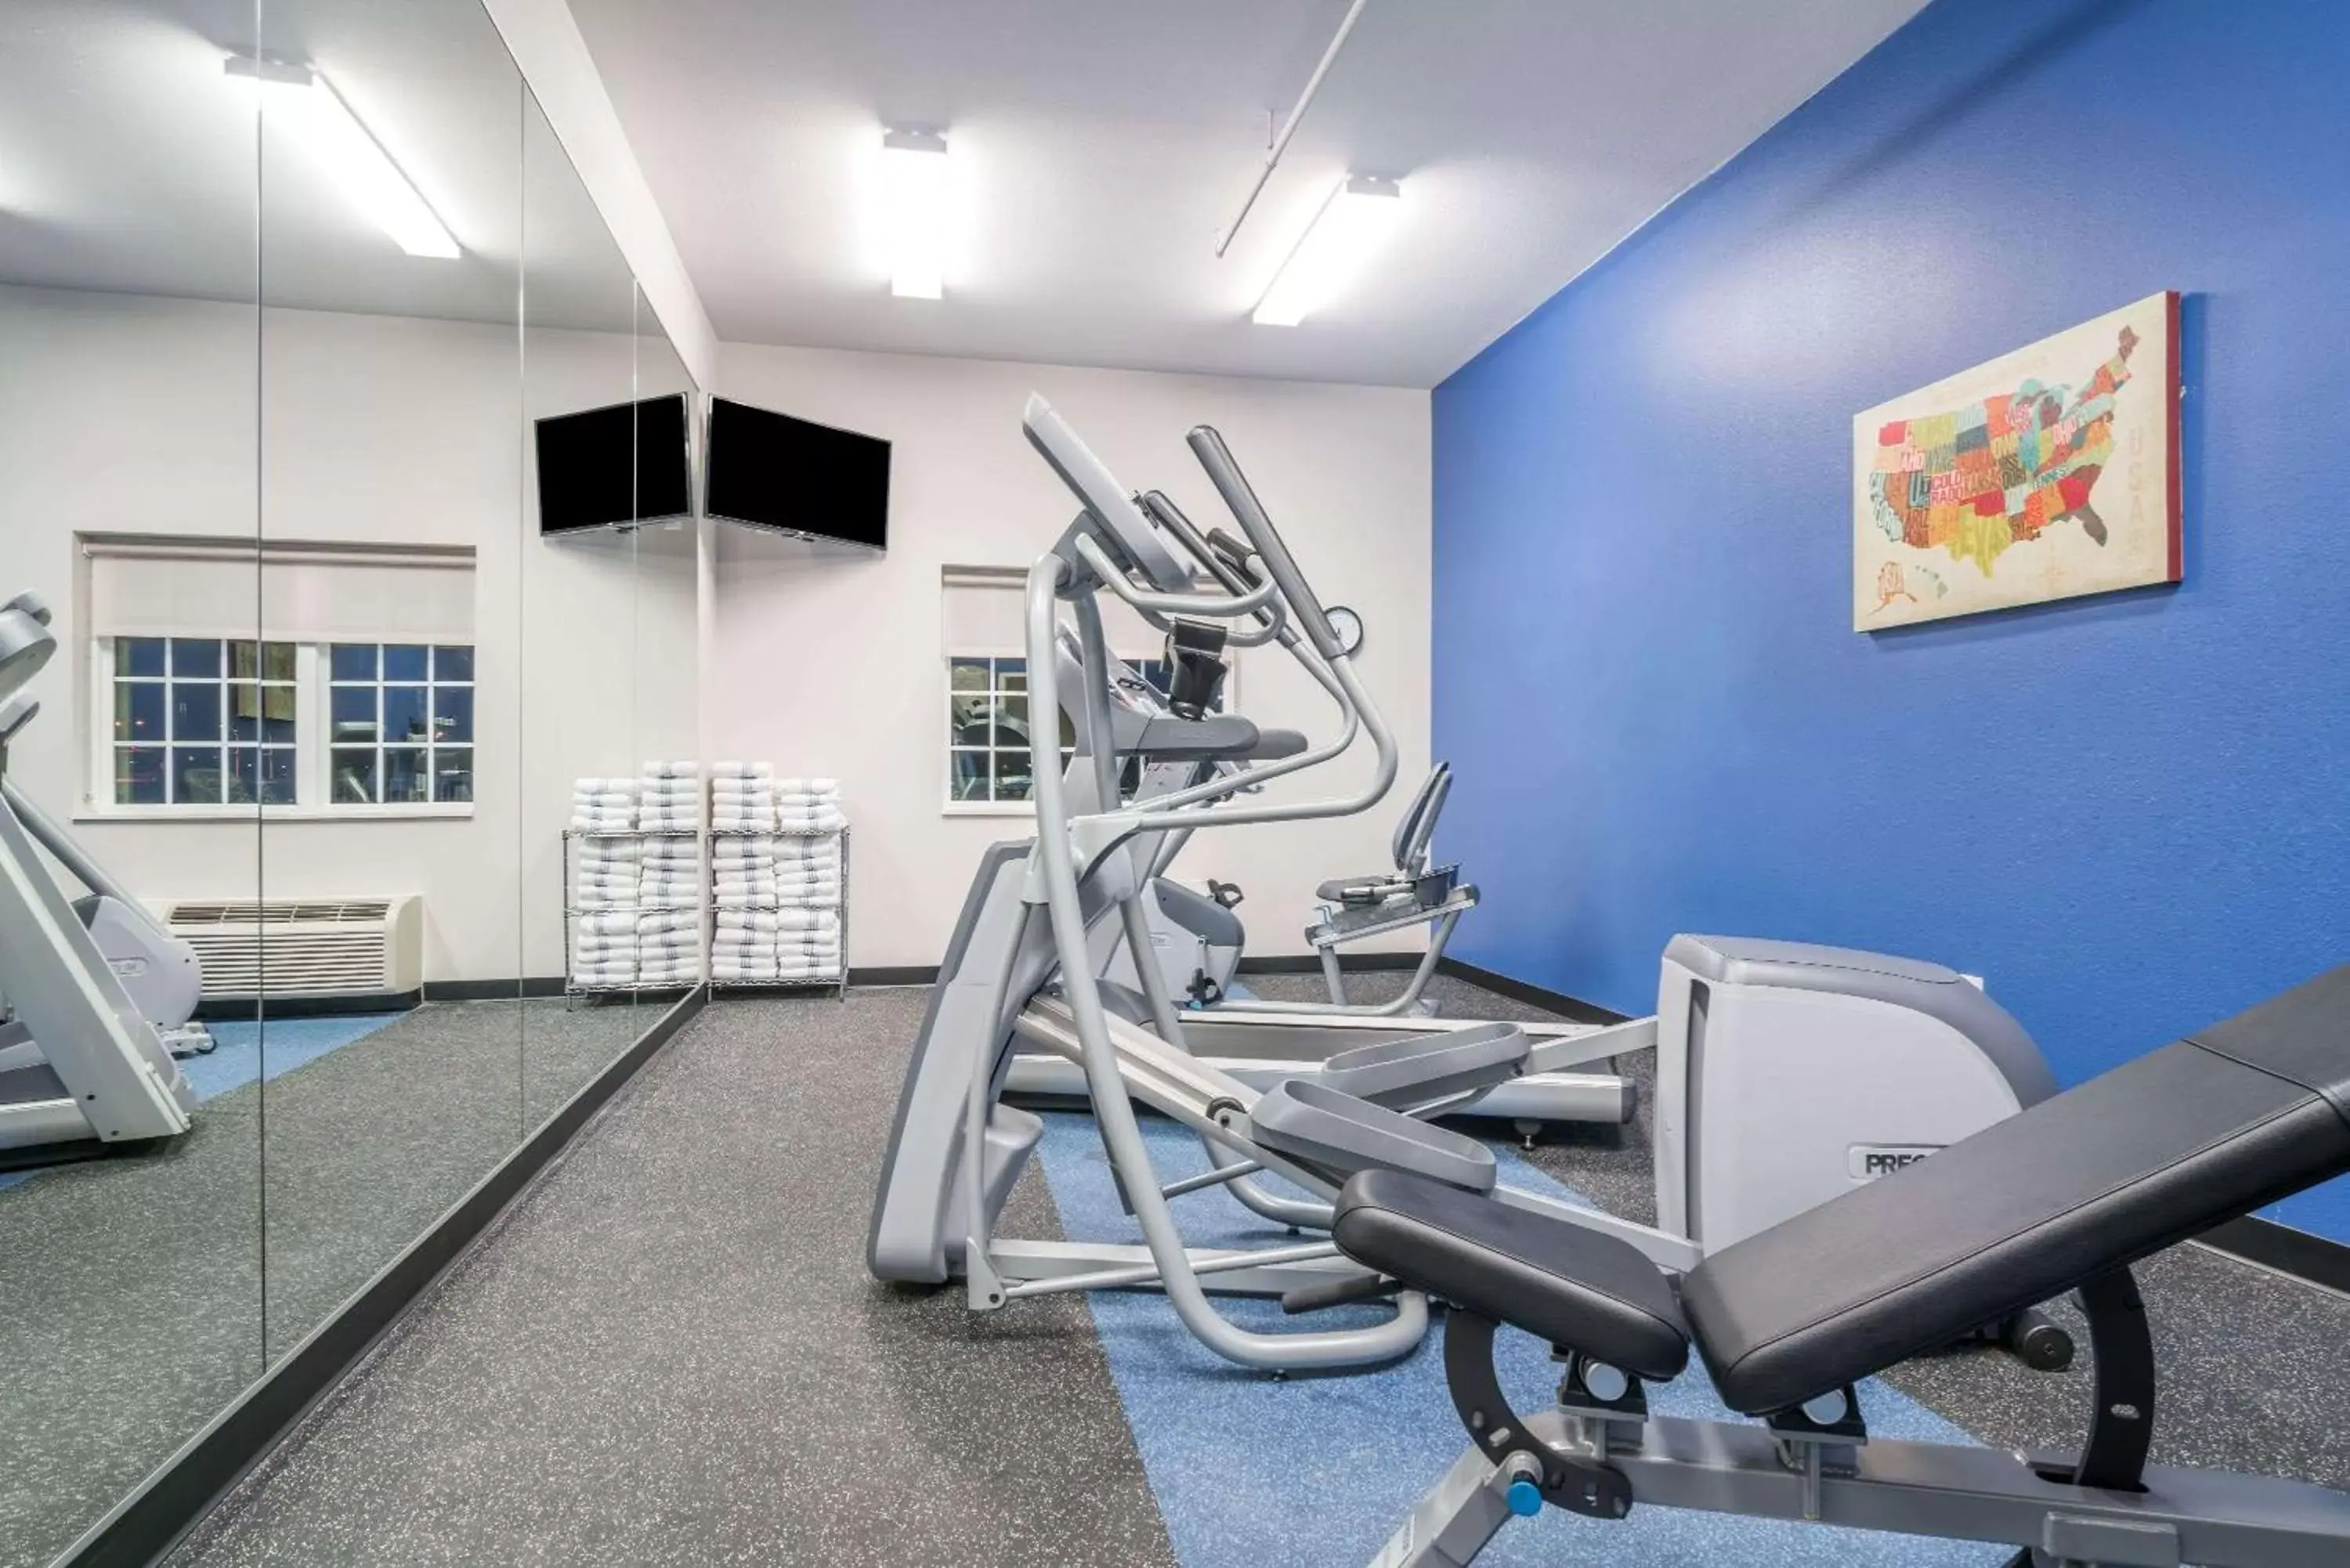 Fitness centre/facilities, Fitness Center/Facilities in Microtel Inn & Suites by Wyndham Rochester South Mayo Clinic